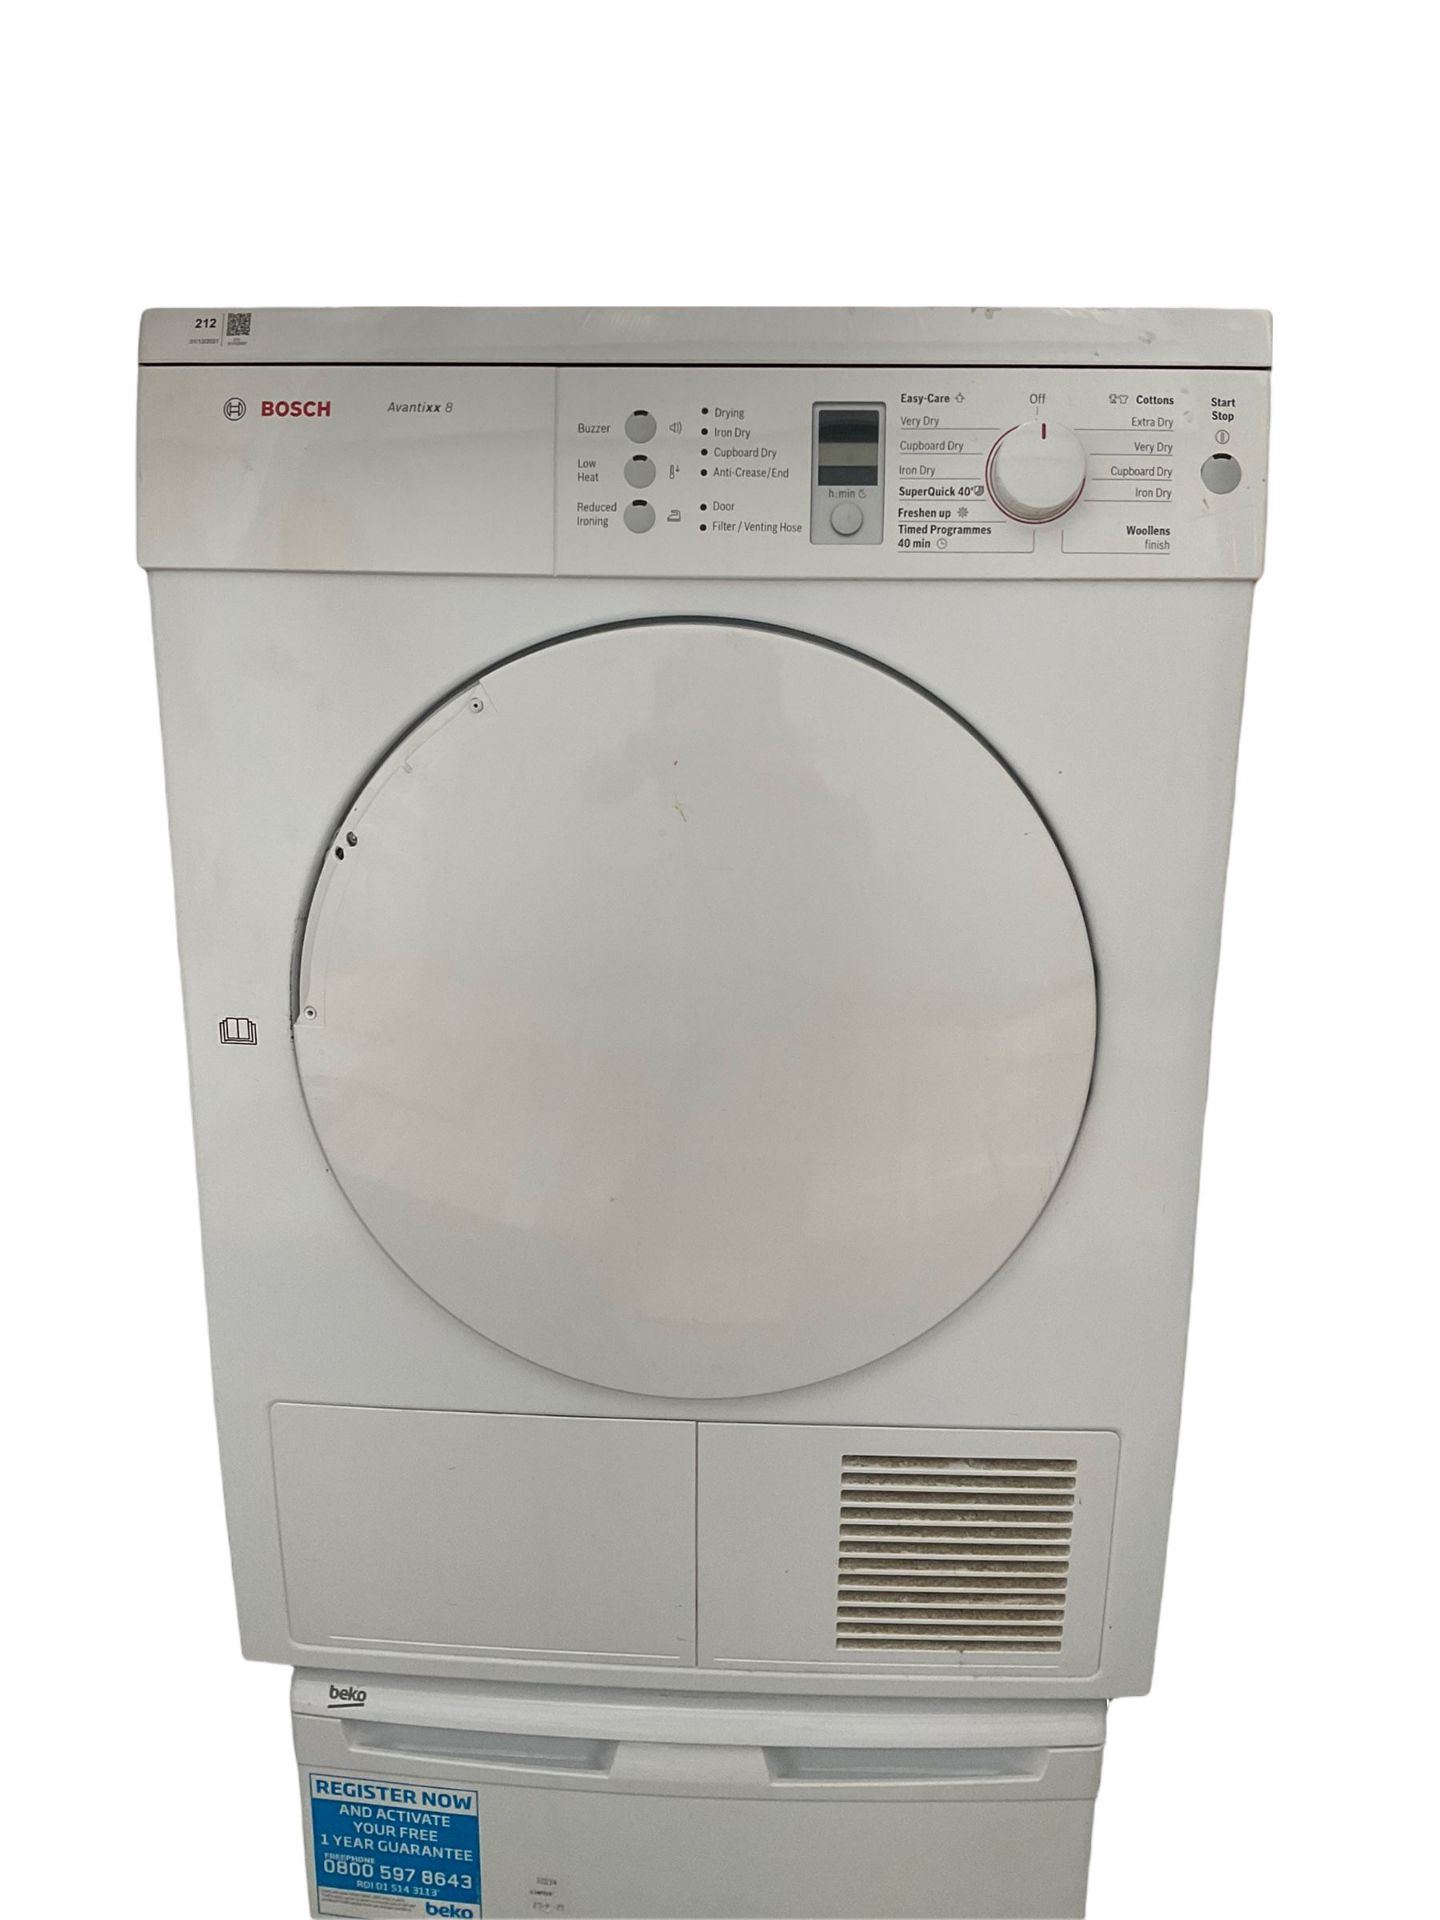 Bosch Avantixx 8 tumble dryer - THIS LOT IS TO BE COLLECTED BY APPOINTMENT FROM DUGGLEBY STORAGE